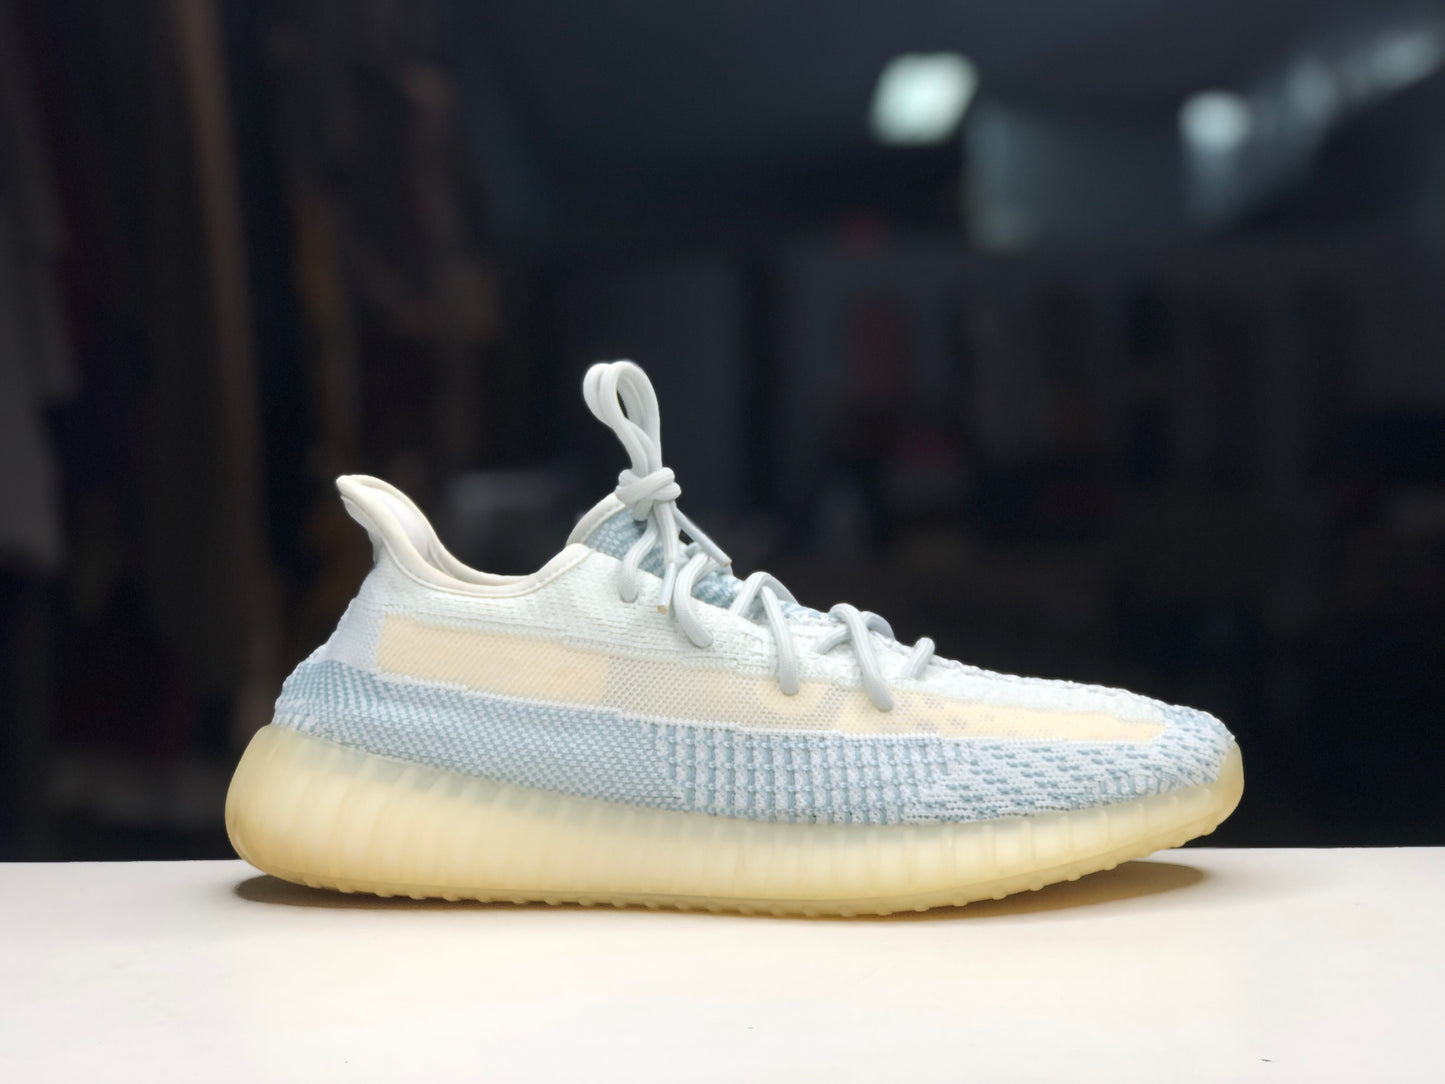 Adidas Yeezy Boost 350 V2 Cloud White (Reflective) Size 11